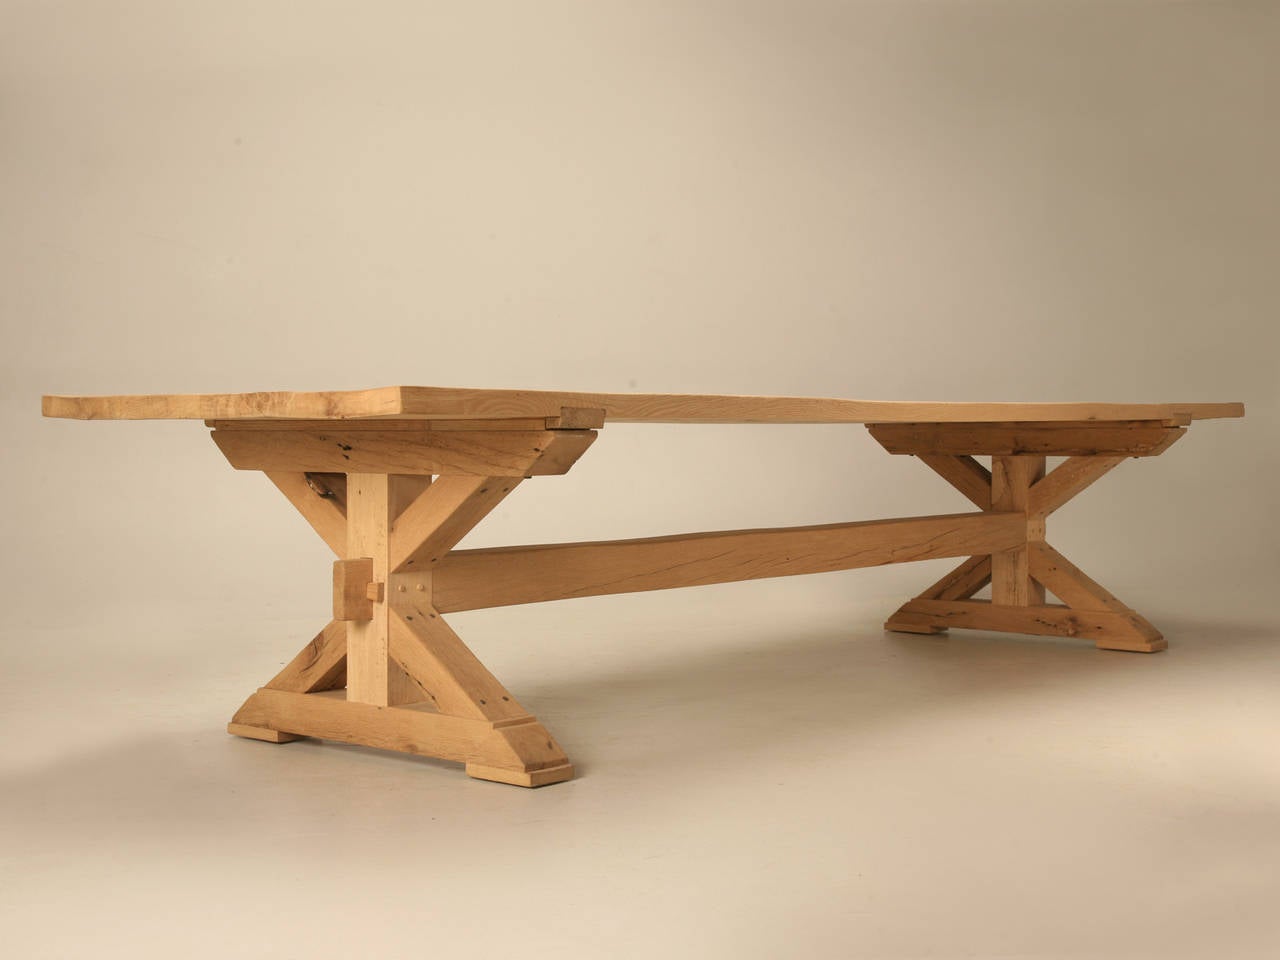 Custom-Made French Inspired Farm Table Reclaimed Oak Any Dimension By Old Plank In New Condition For Sale In Chicago, IL